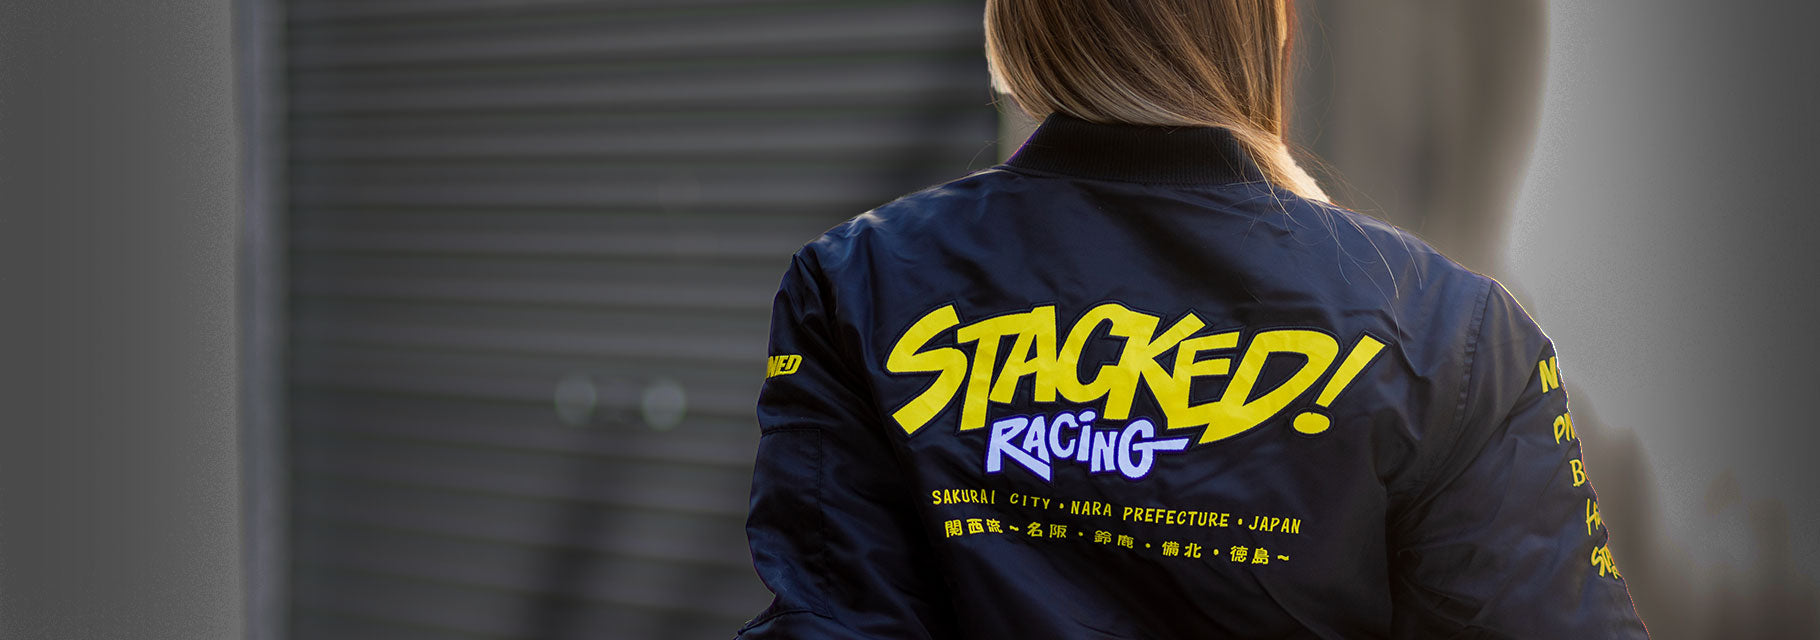 Stacked Racing